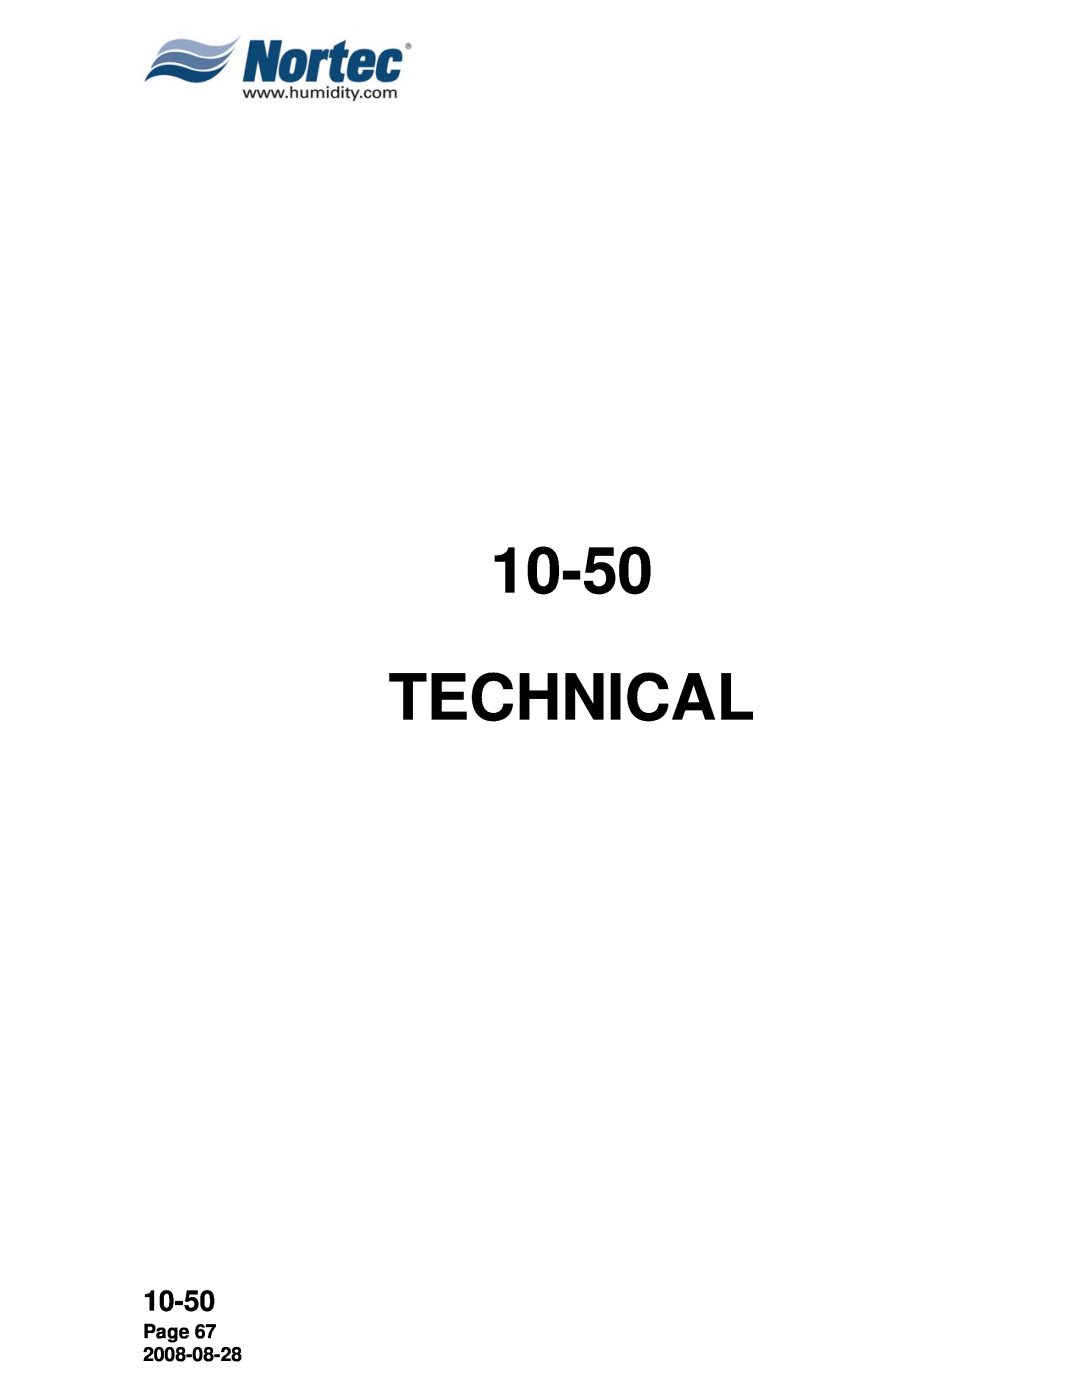 Nortec NH Series installation manual Technical, 10-50, Page 67 